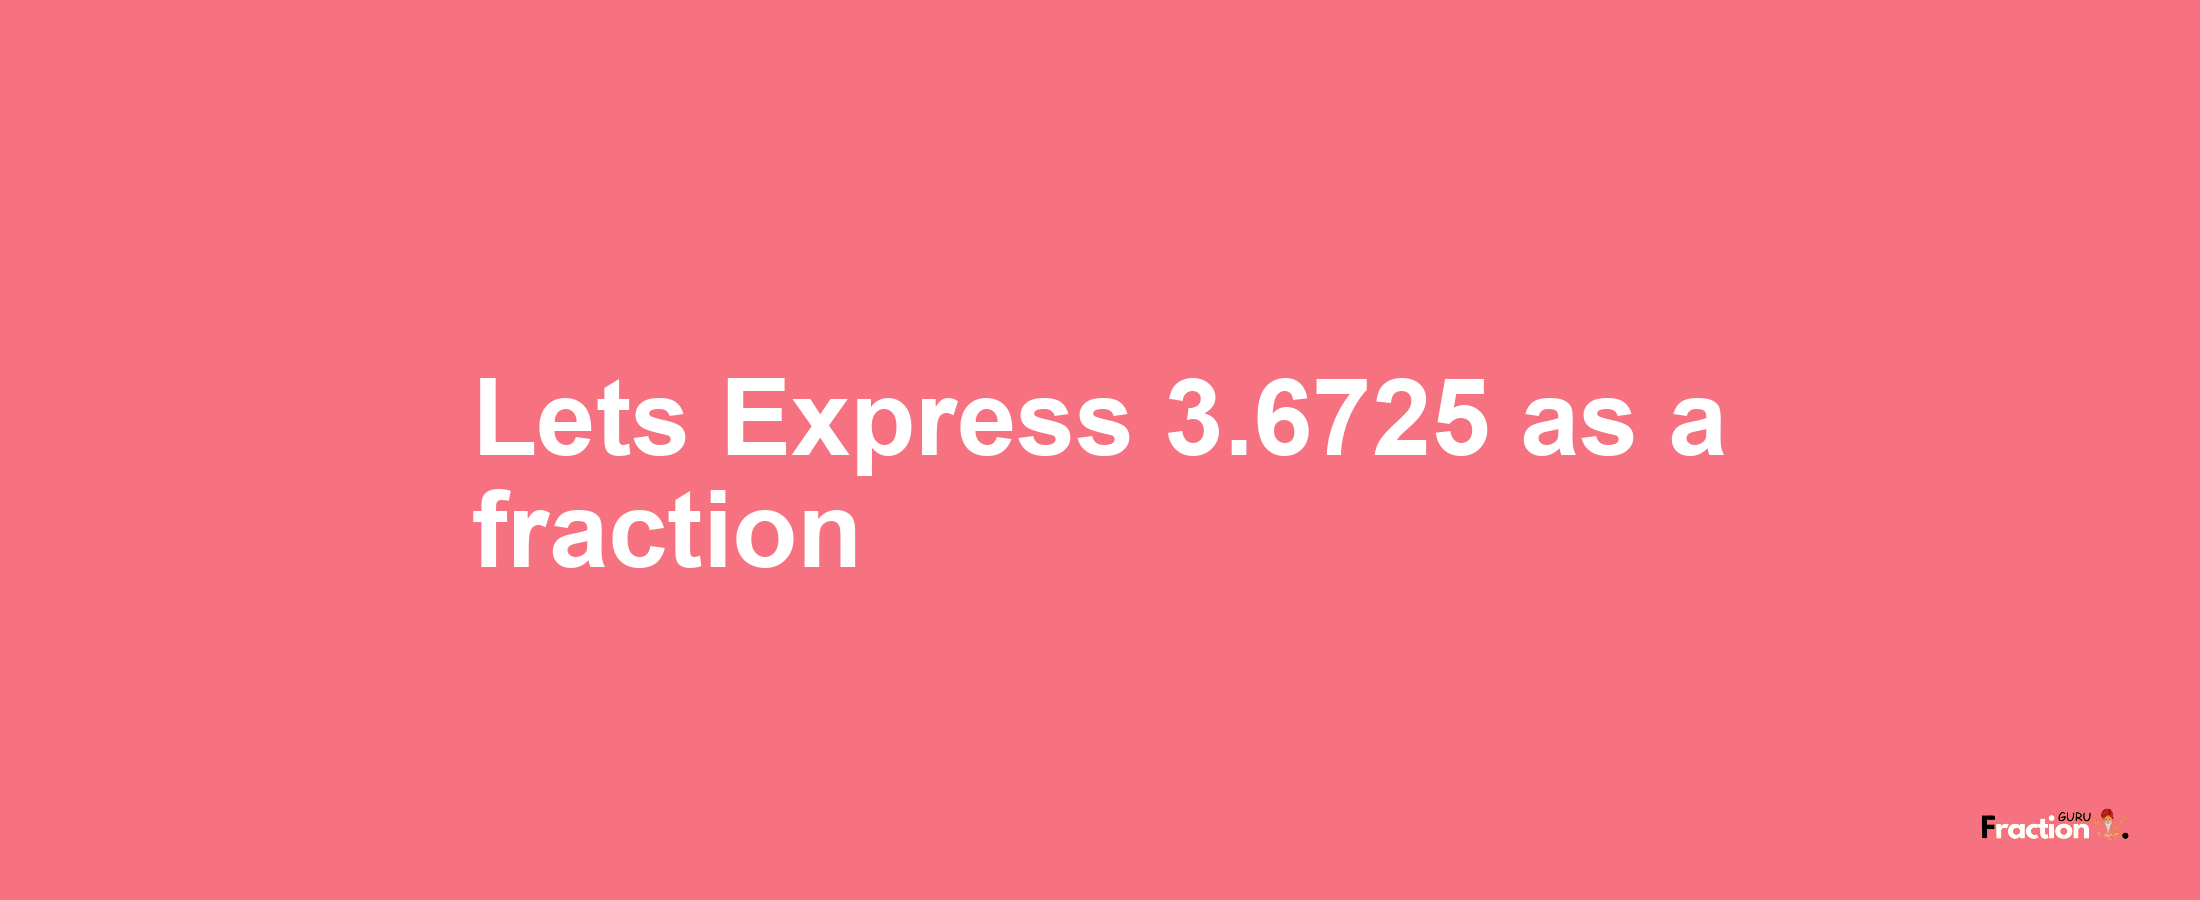 Lets Express 3.6725 as afraction